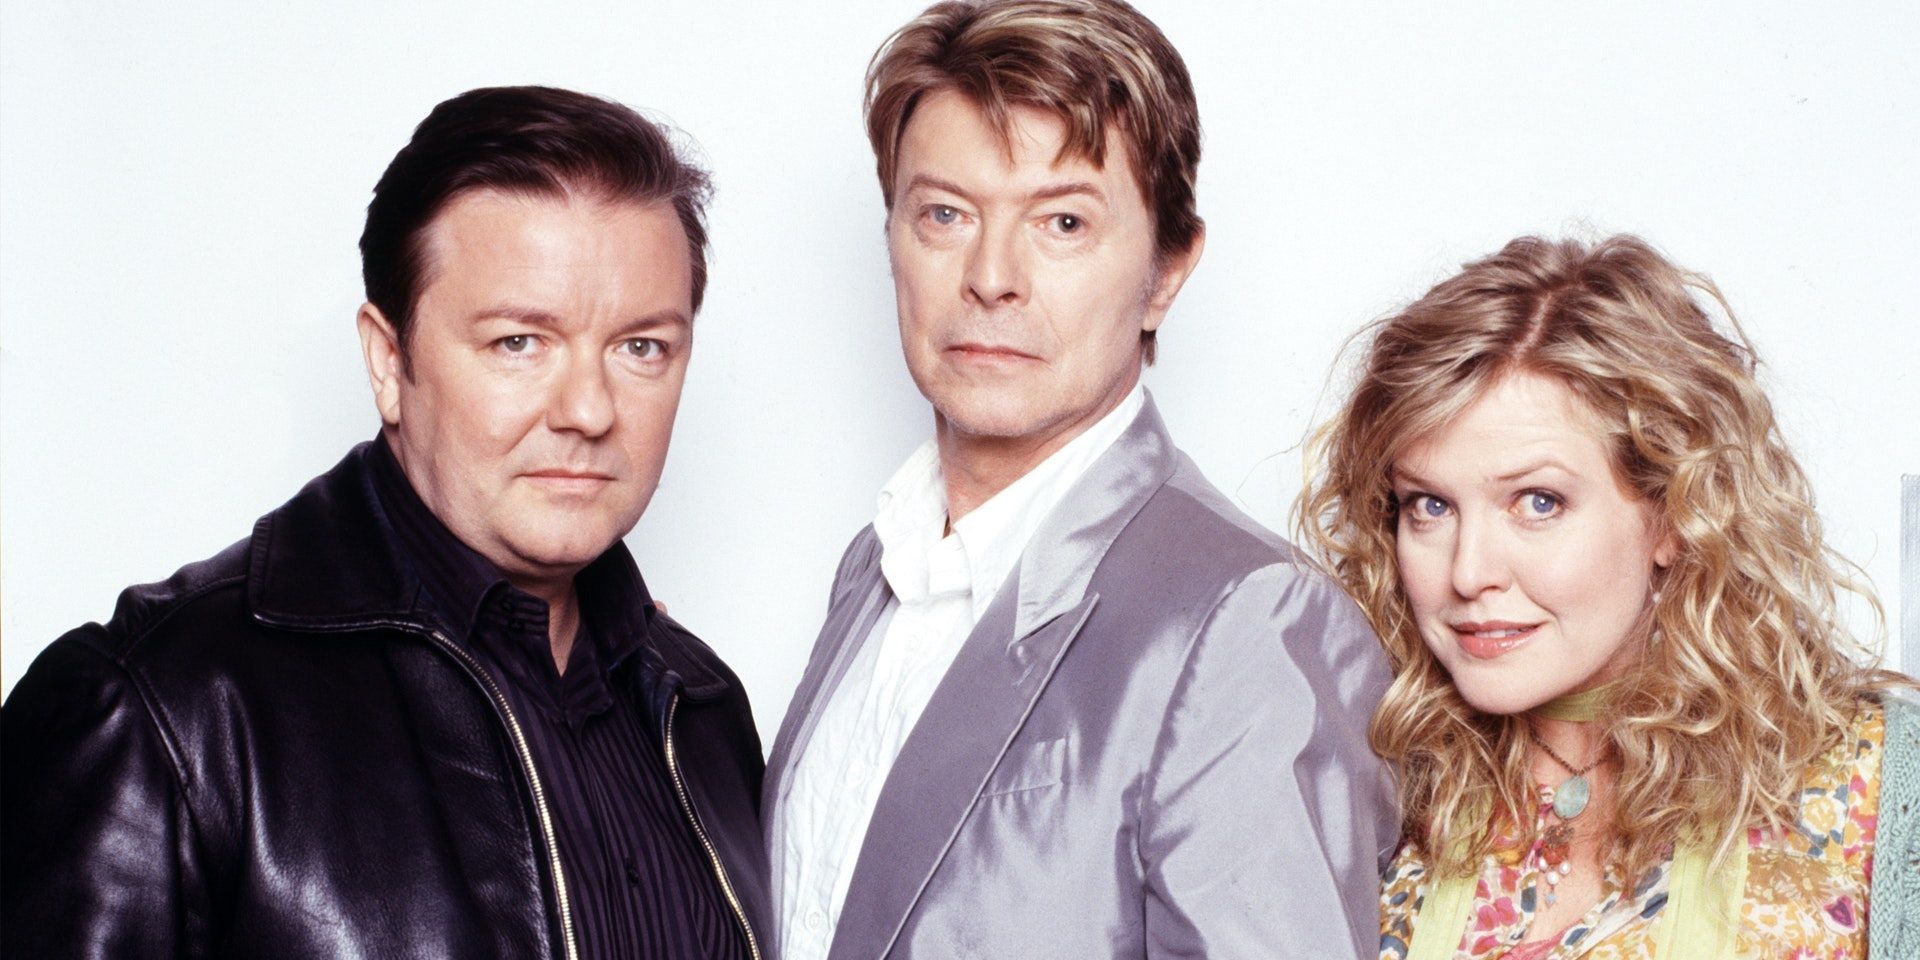 Ricky Gervais, Ashley Jensen, and David Bowie in Extras